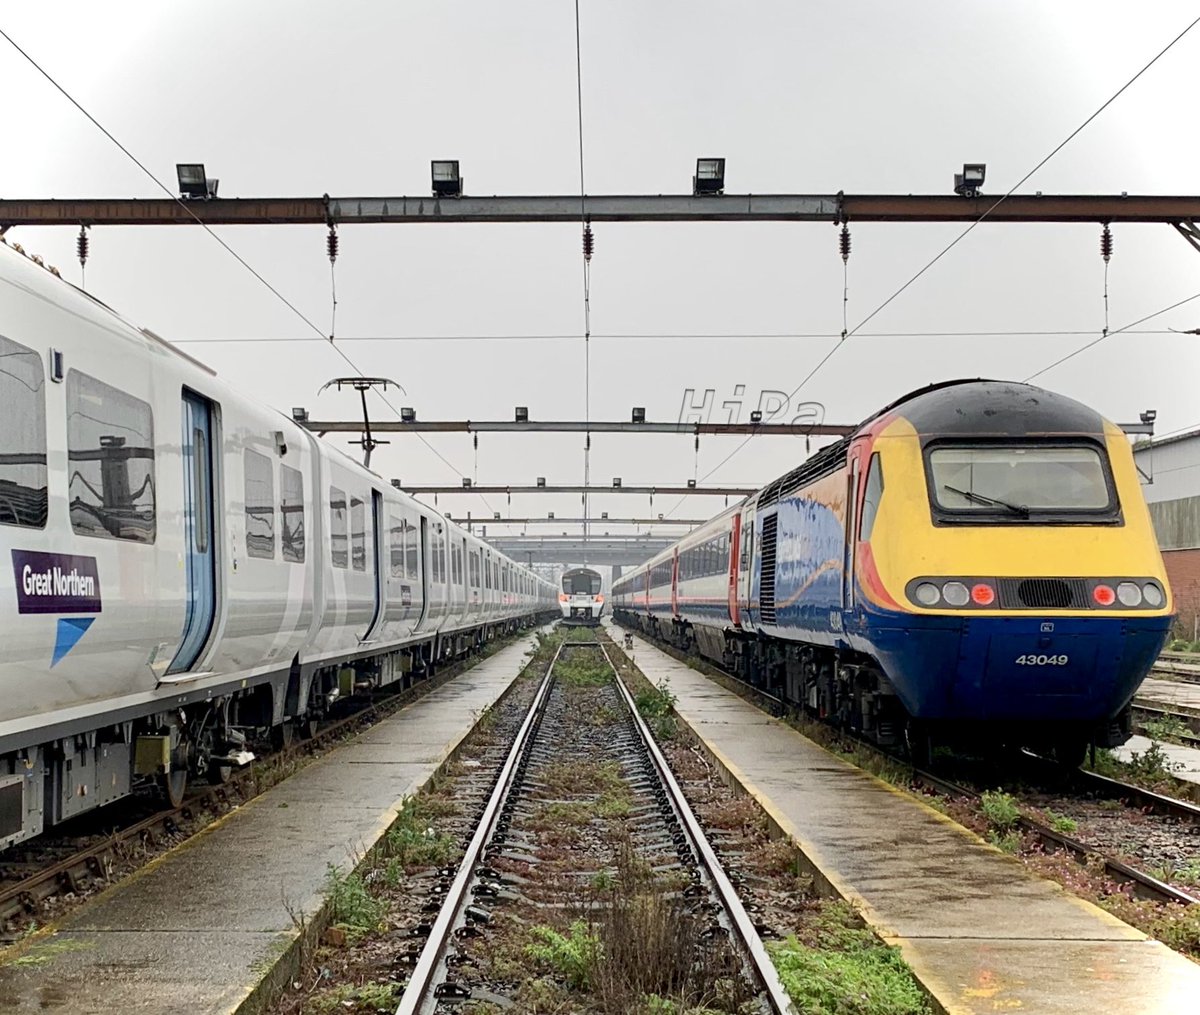 Changes since this photo was taken #OnThisDate five years ago: > East Midlands Trains gone > #MML #HST services gone > Cricklewood North Sidings gone > Great Northern #Class717 plying the ECML > #Class43 43049 ‘Neville Hill’ now in Nanking Blue